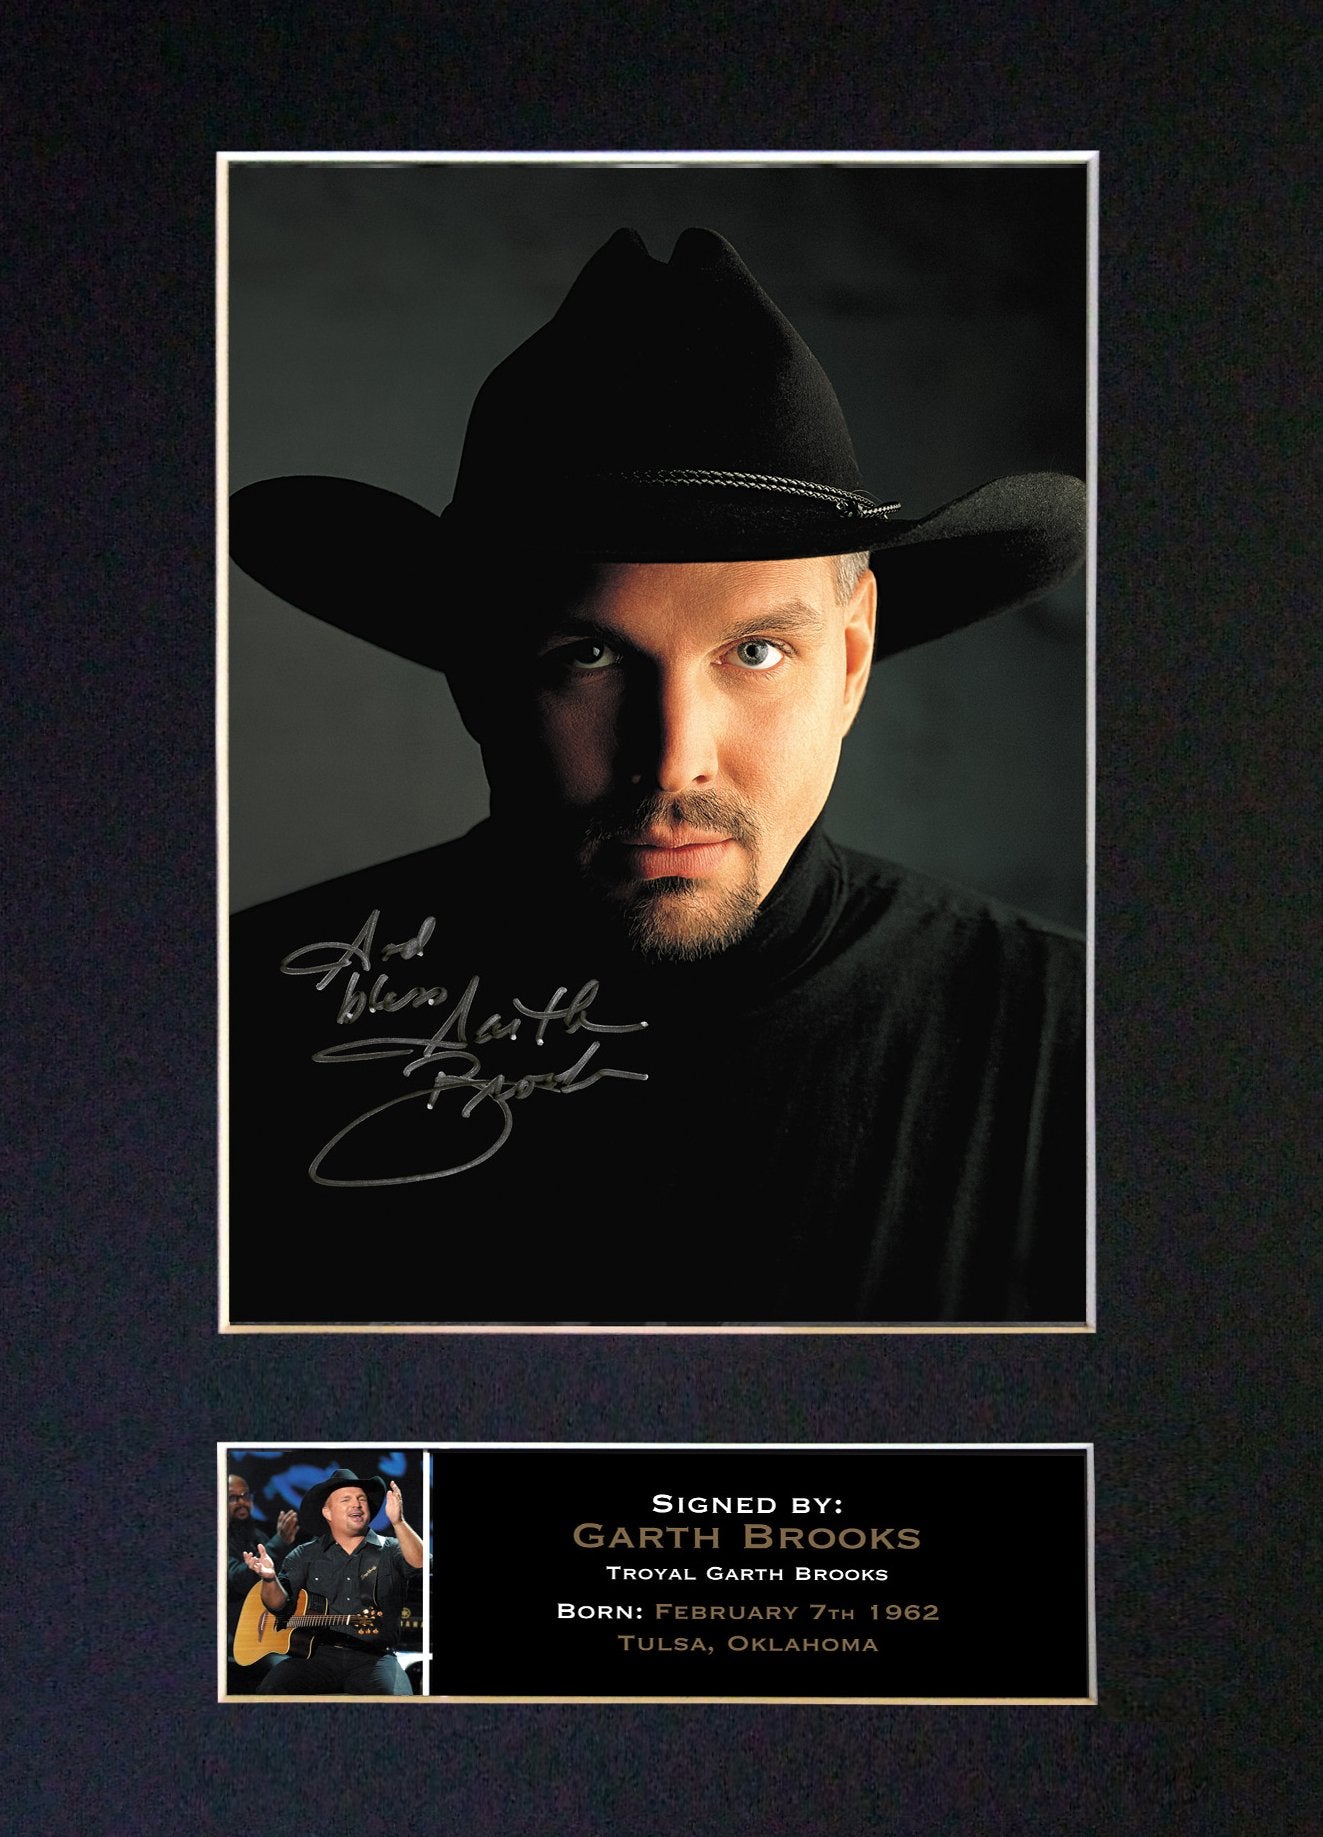 GARTH BROOKS Mounted Signed Photo Reproduction Autograph Print A4 332